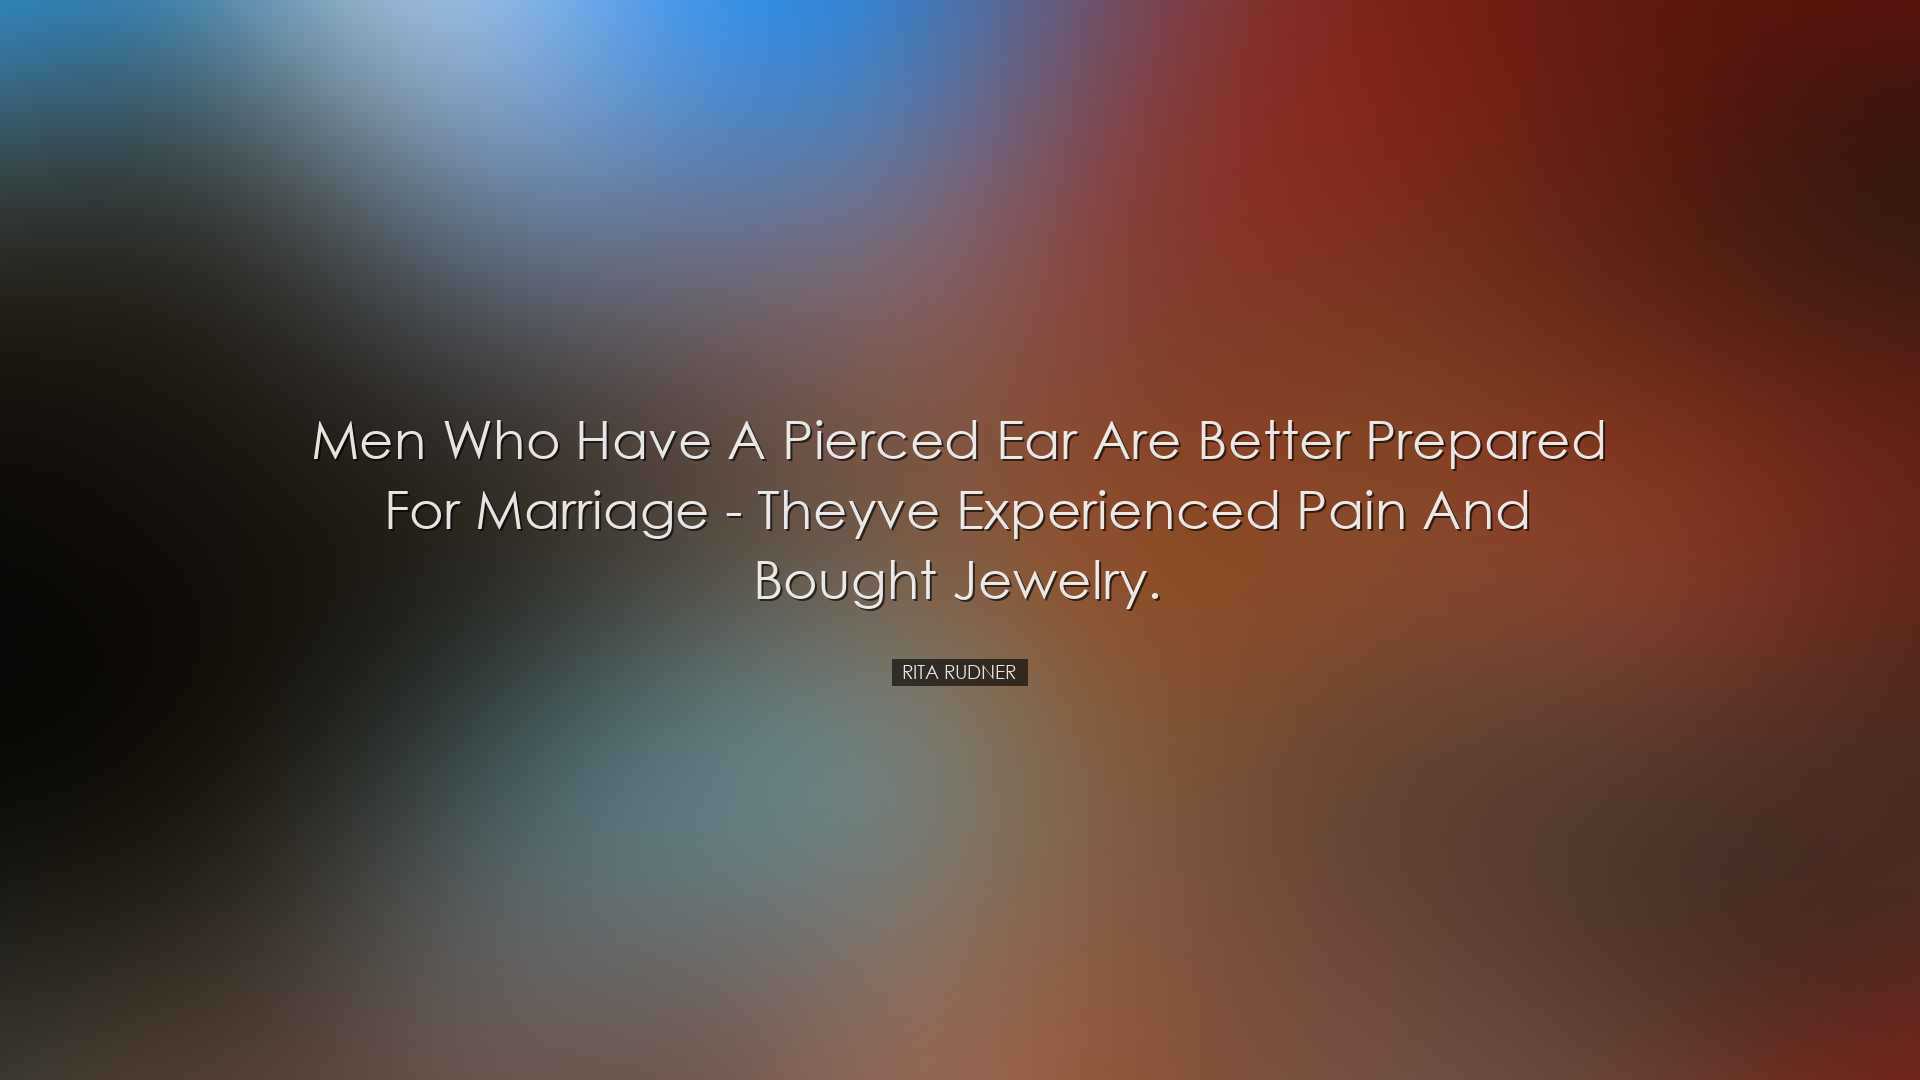 Men who have a pierced ear are better prepared for marriage - they